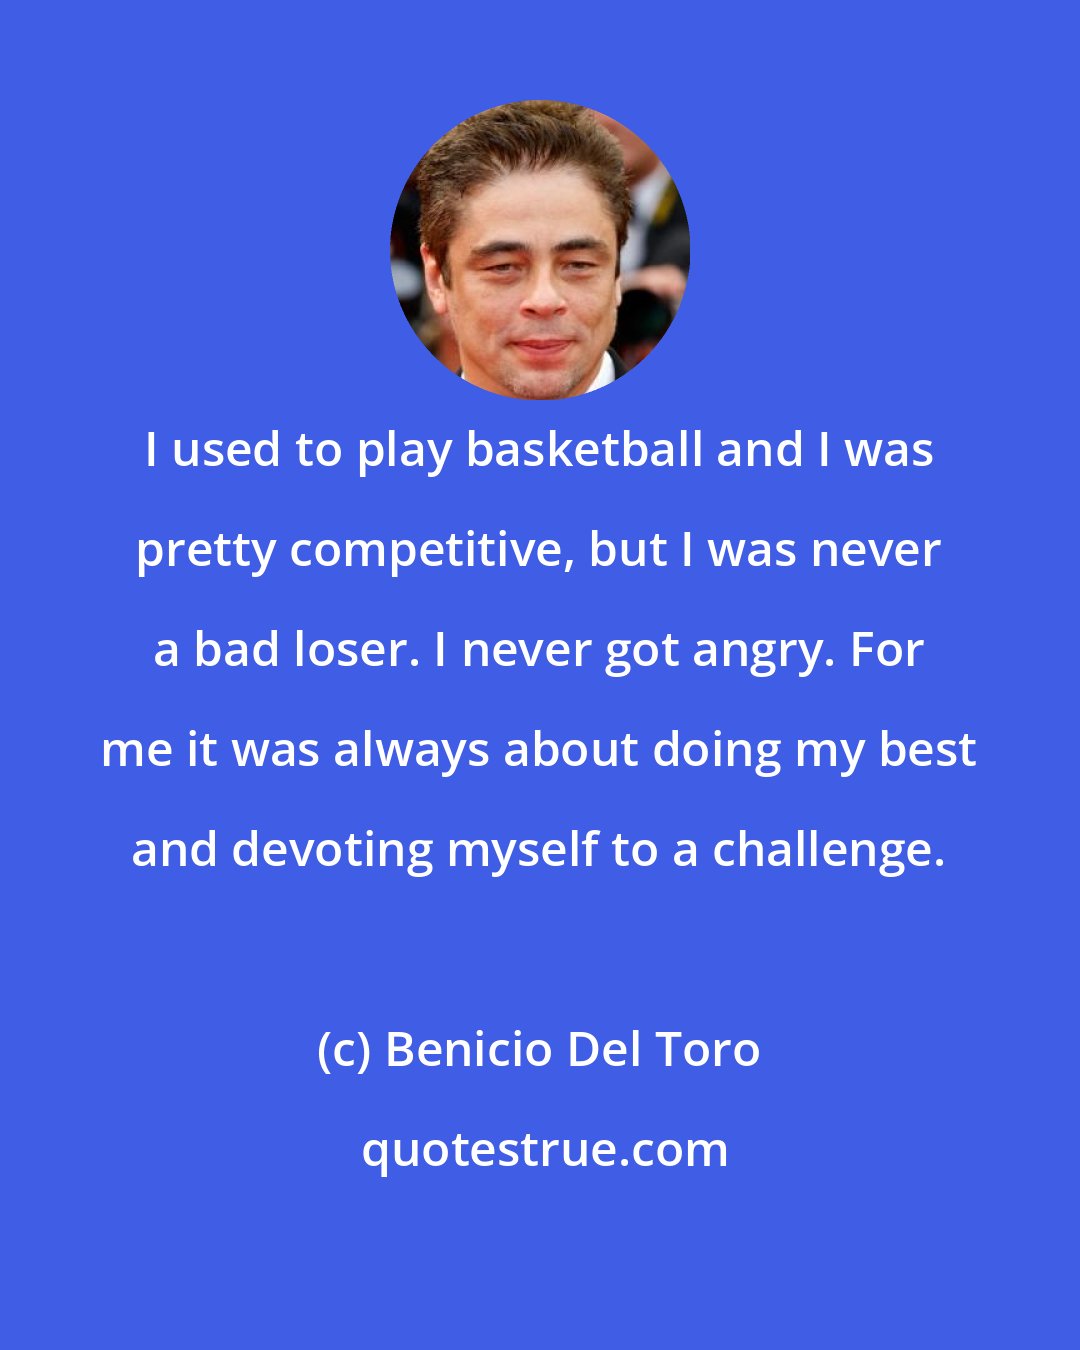 Benicio Del Toro: I used to play basketball and I was pretty competitive, but I was never a bad loser. I never got angry. For me it was always about doing my best and devoting myself to a challenge.